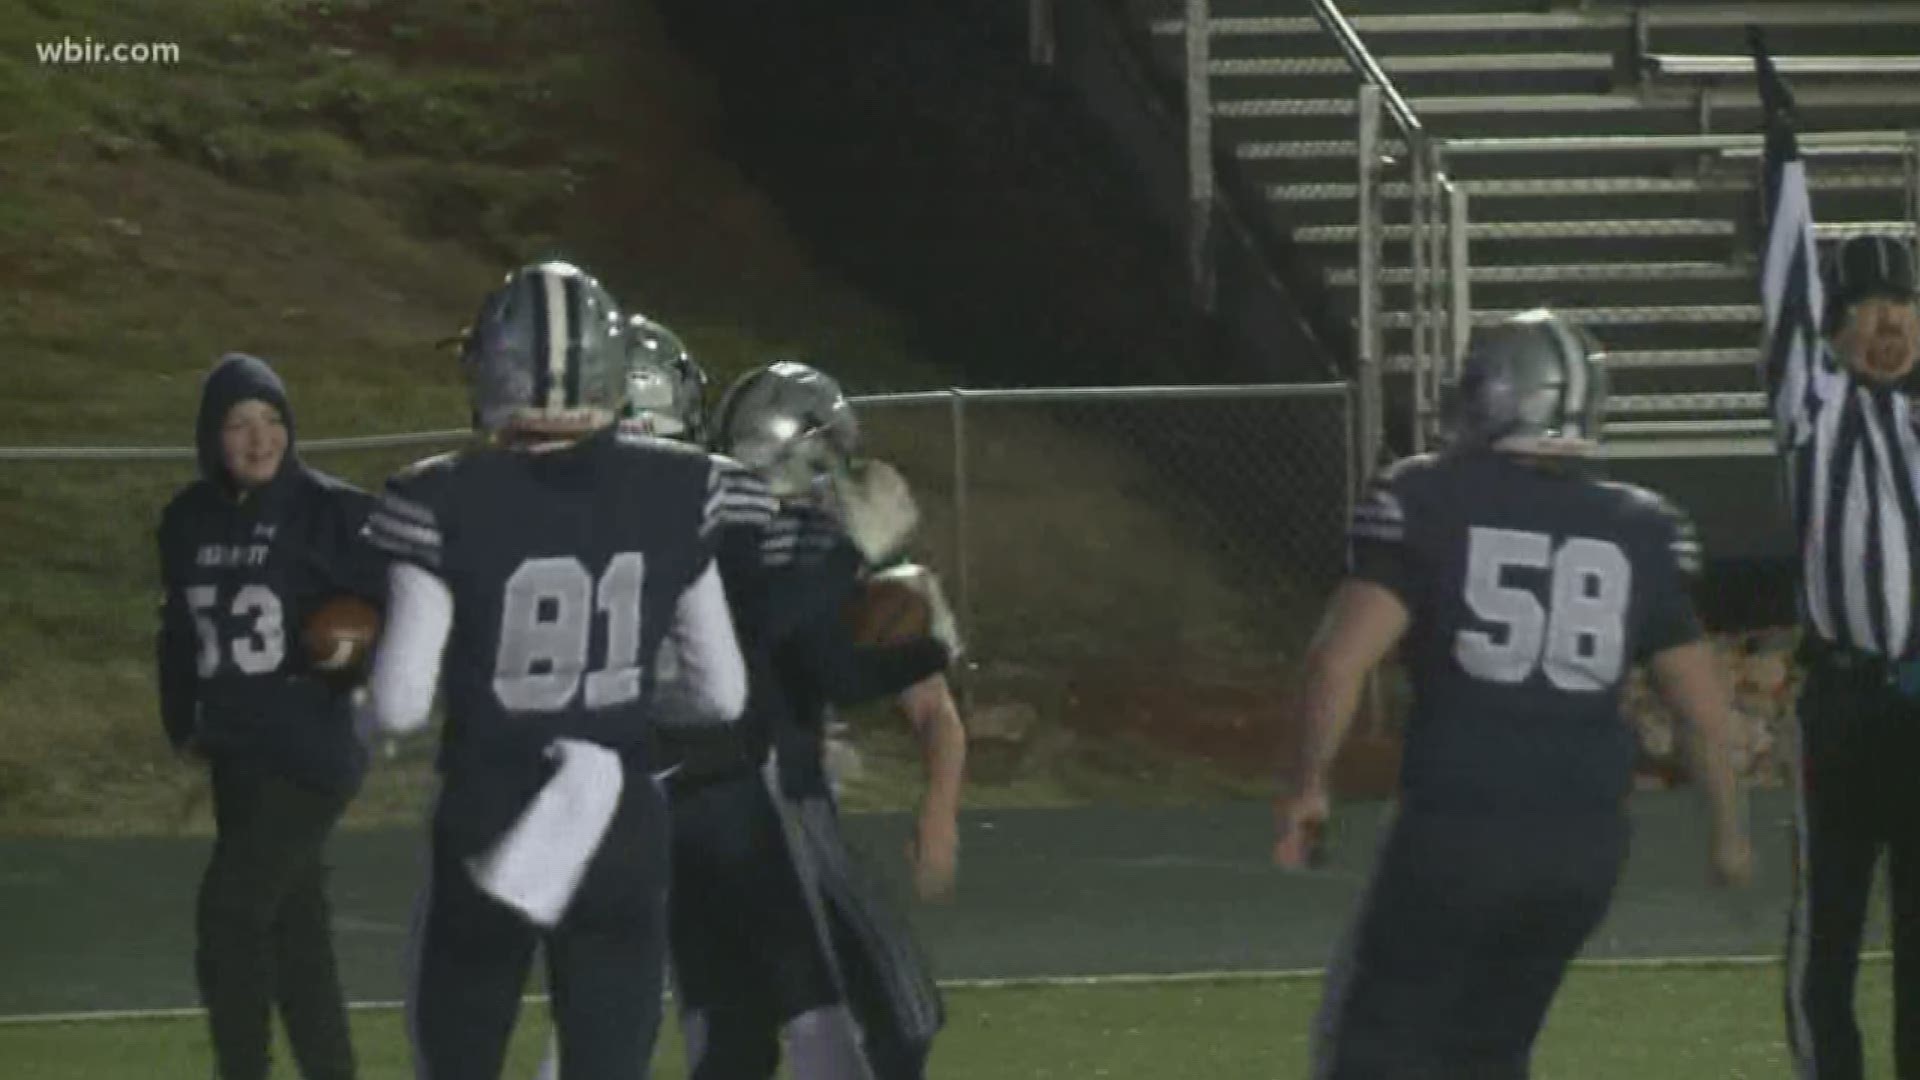 Farragut advances to round two after defeating Bradley Central.